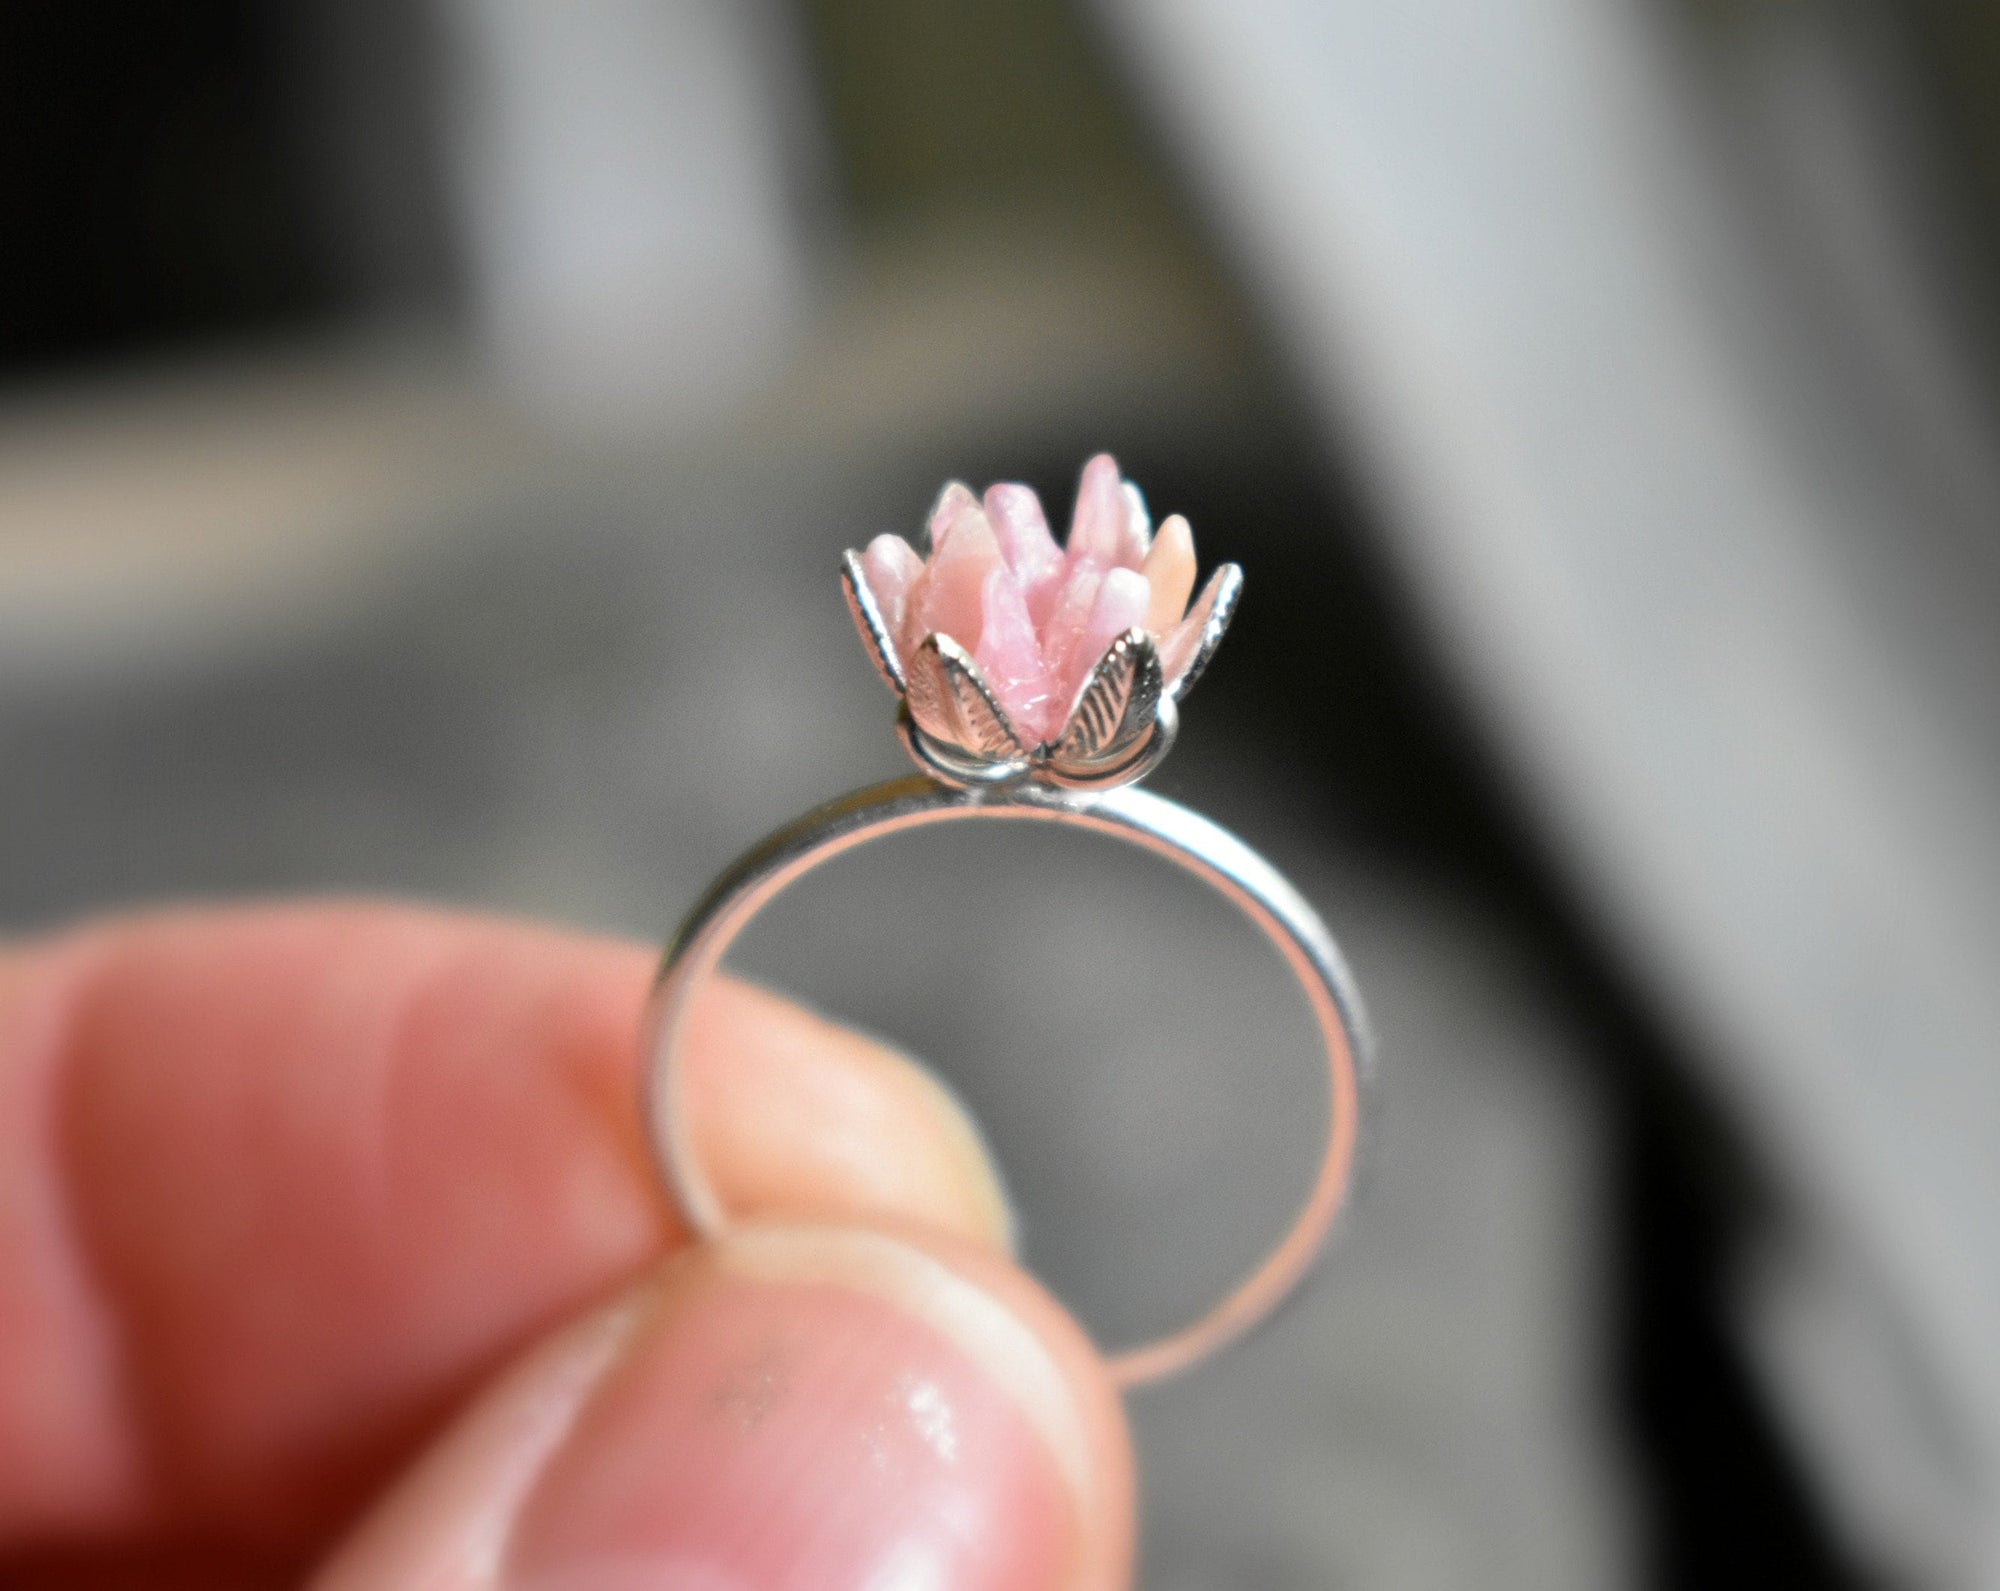 Unique Rhodochrosite Ring, Pink and Silver Jewelry, Pink Crystal Engagement Ring, Lotus Flower Ring in Silver, Rough Gemstone Jewelry